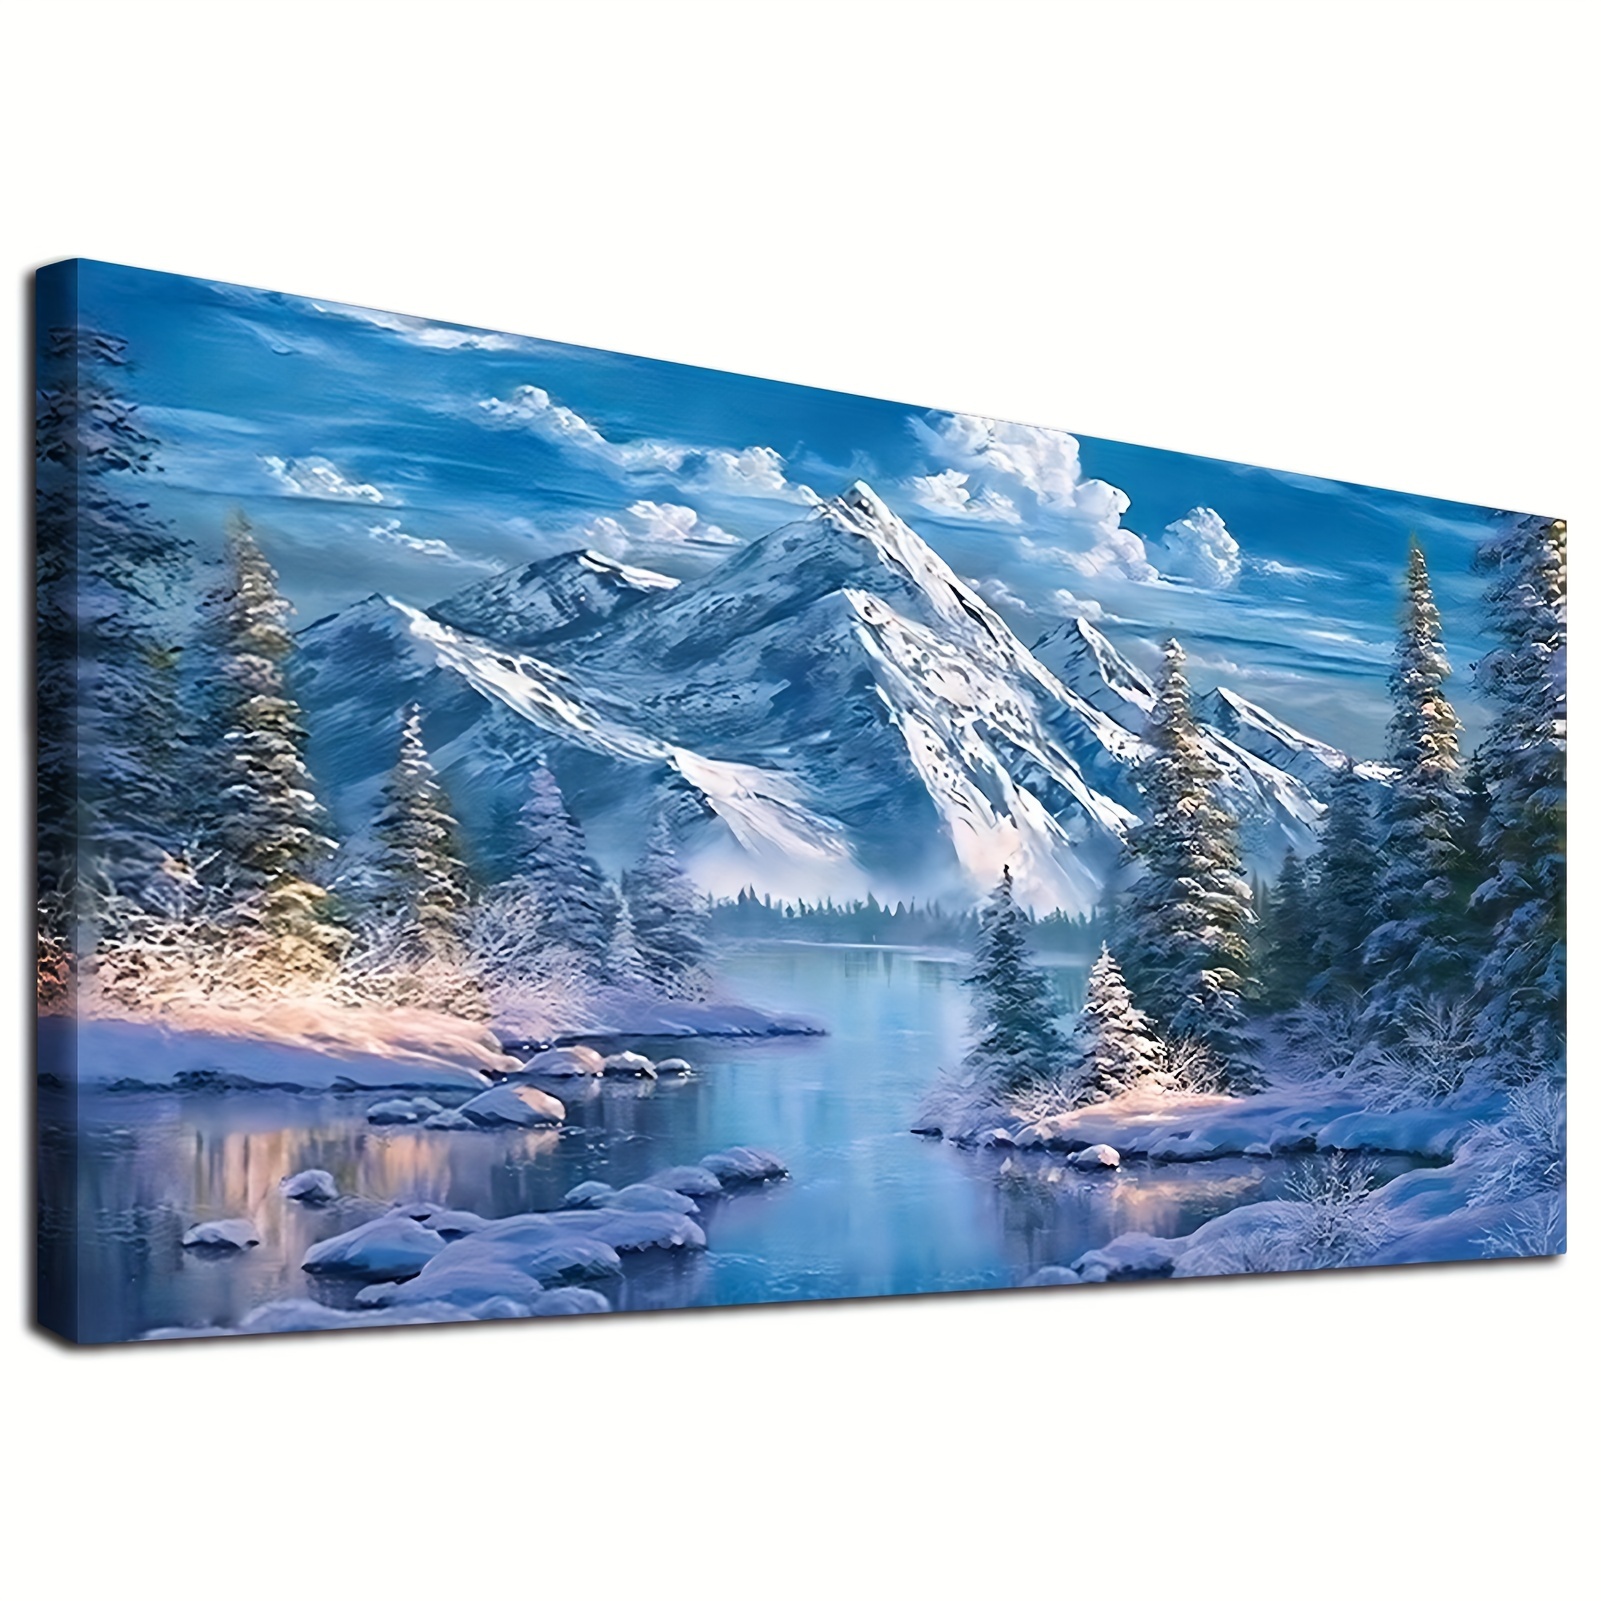 5D DIY Large Diamond Painting Kits For Adult,15.7x27.5inch/40x70cm Mountain  And River Elk Round Full Rhinestone Rhinestone Art Kits Picture By Number